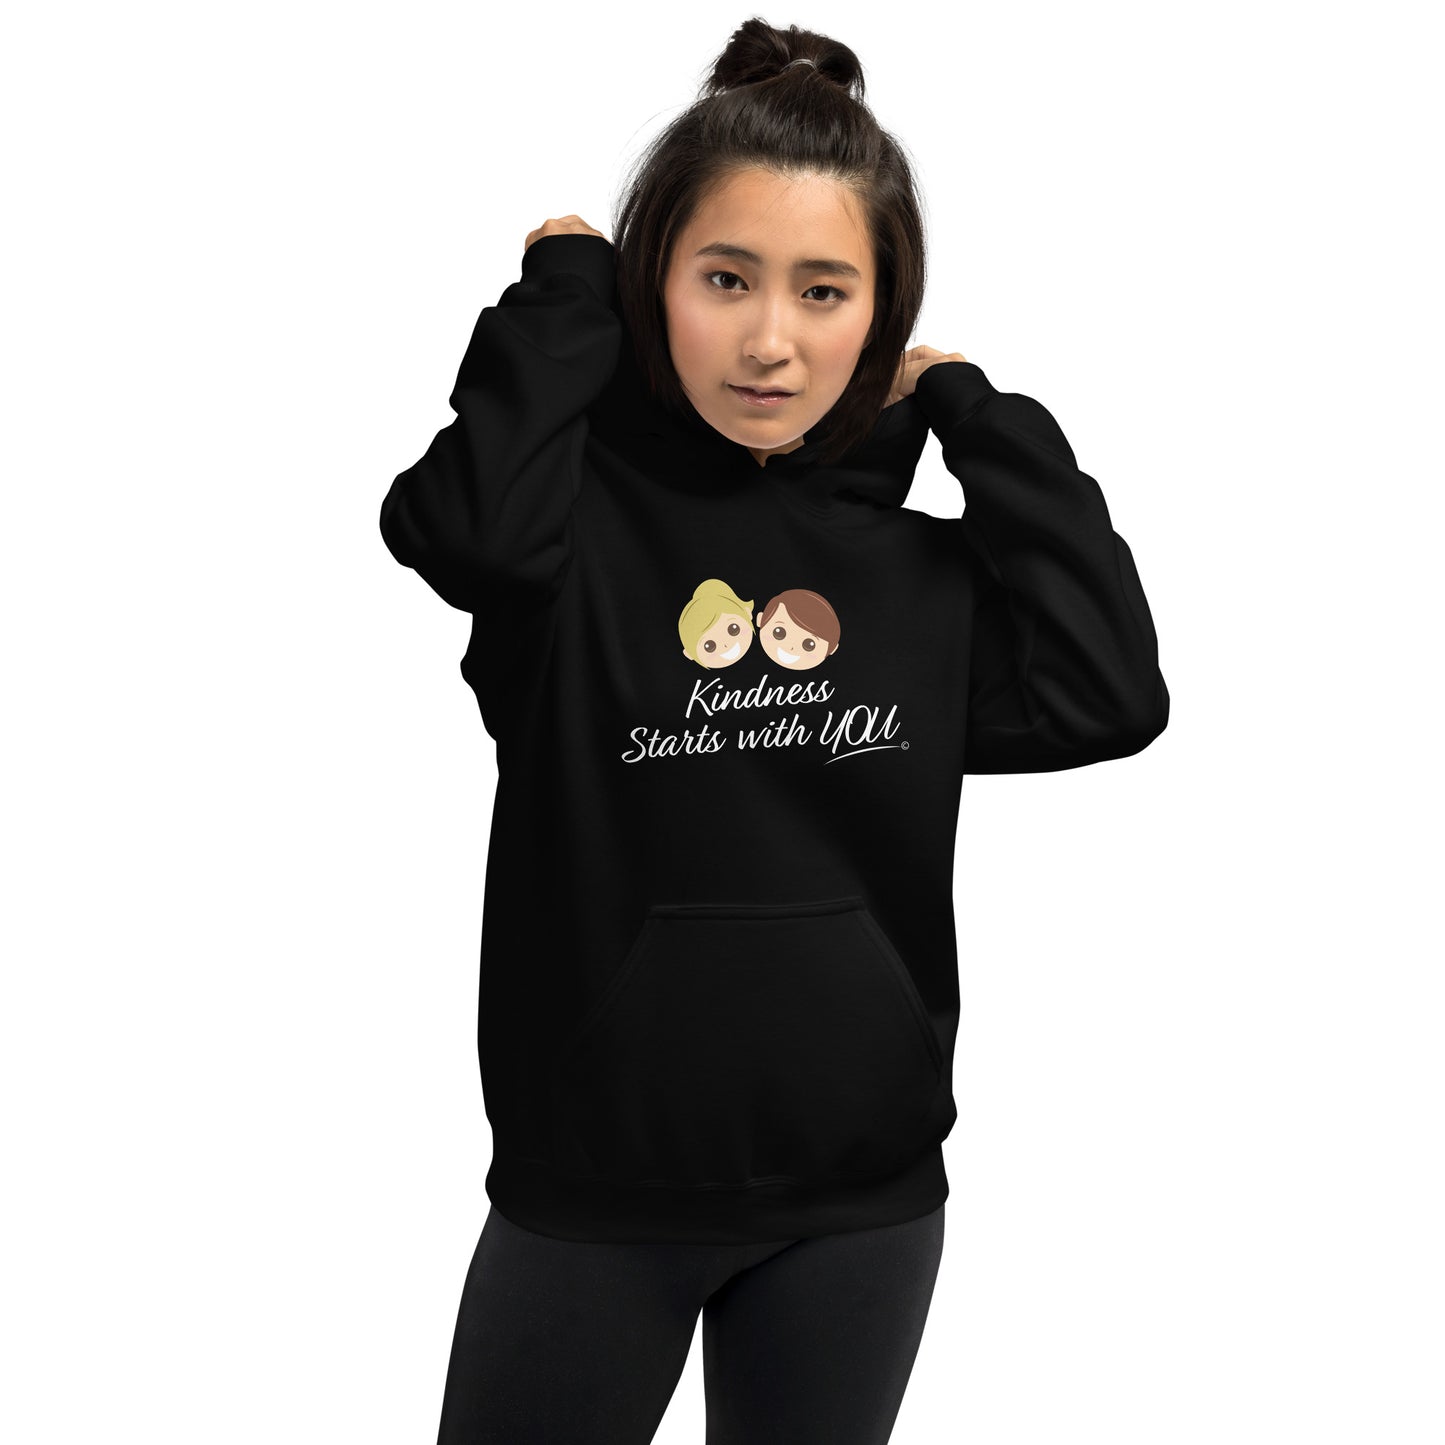 A confident woman young modeling a cozy unisex hoodie in black, featuring the uplifting quote 'Kindness Starts with You' in bold lettering.